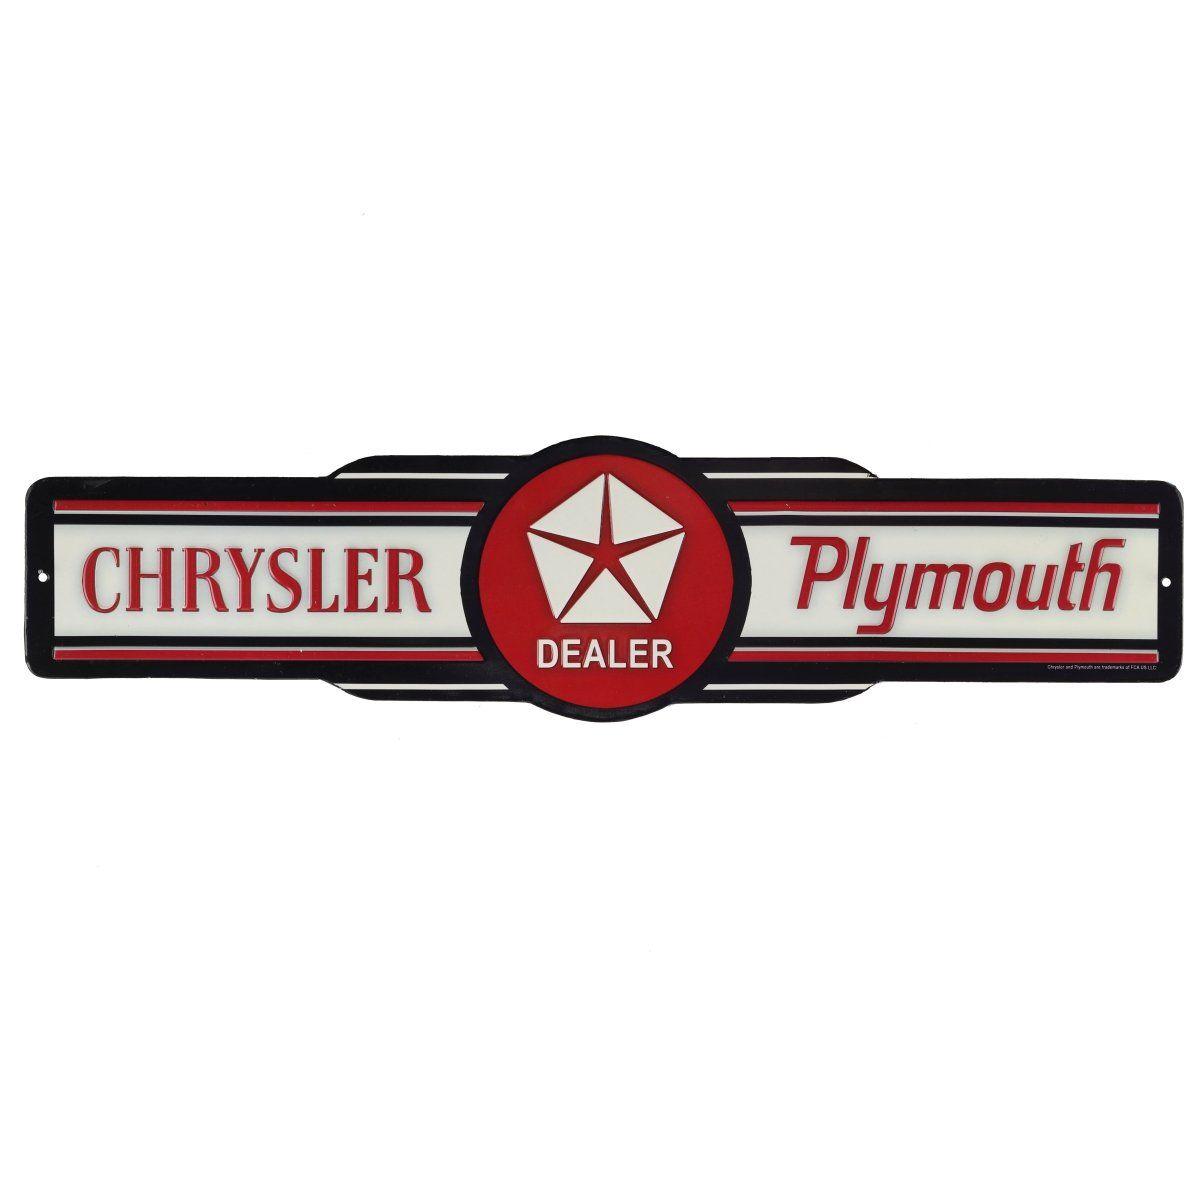 Chrysler Plymouth Logo - Amazon.com: Open Road Brands Chrysler Plymouth Embossed Tin Sign ...